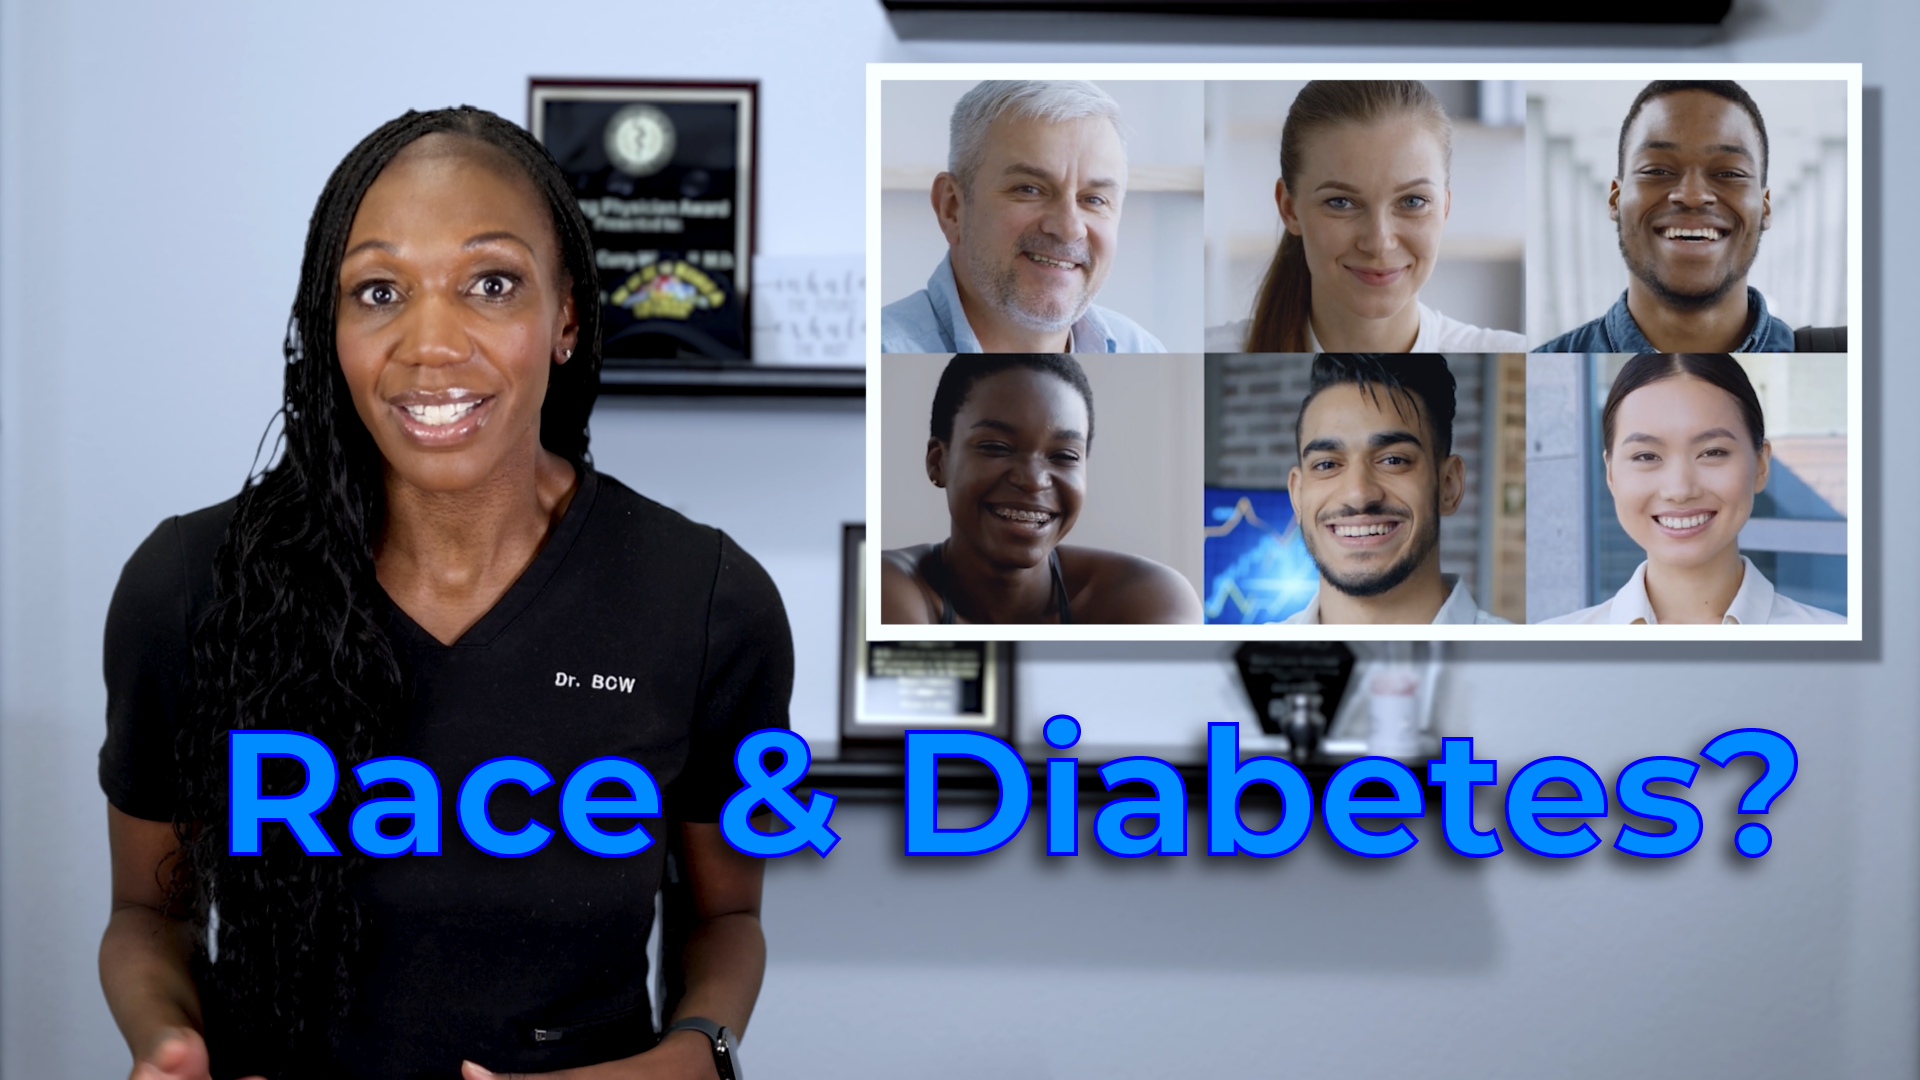 Race and Diabetes?